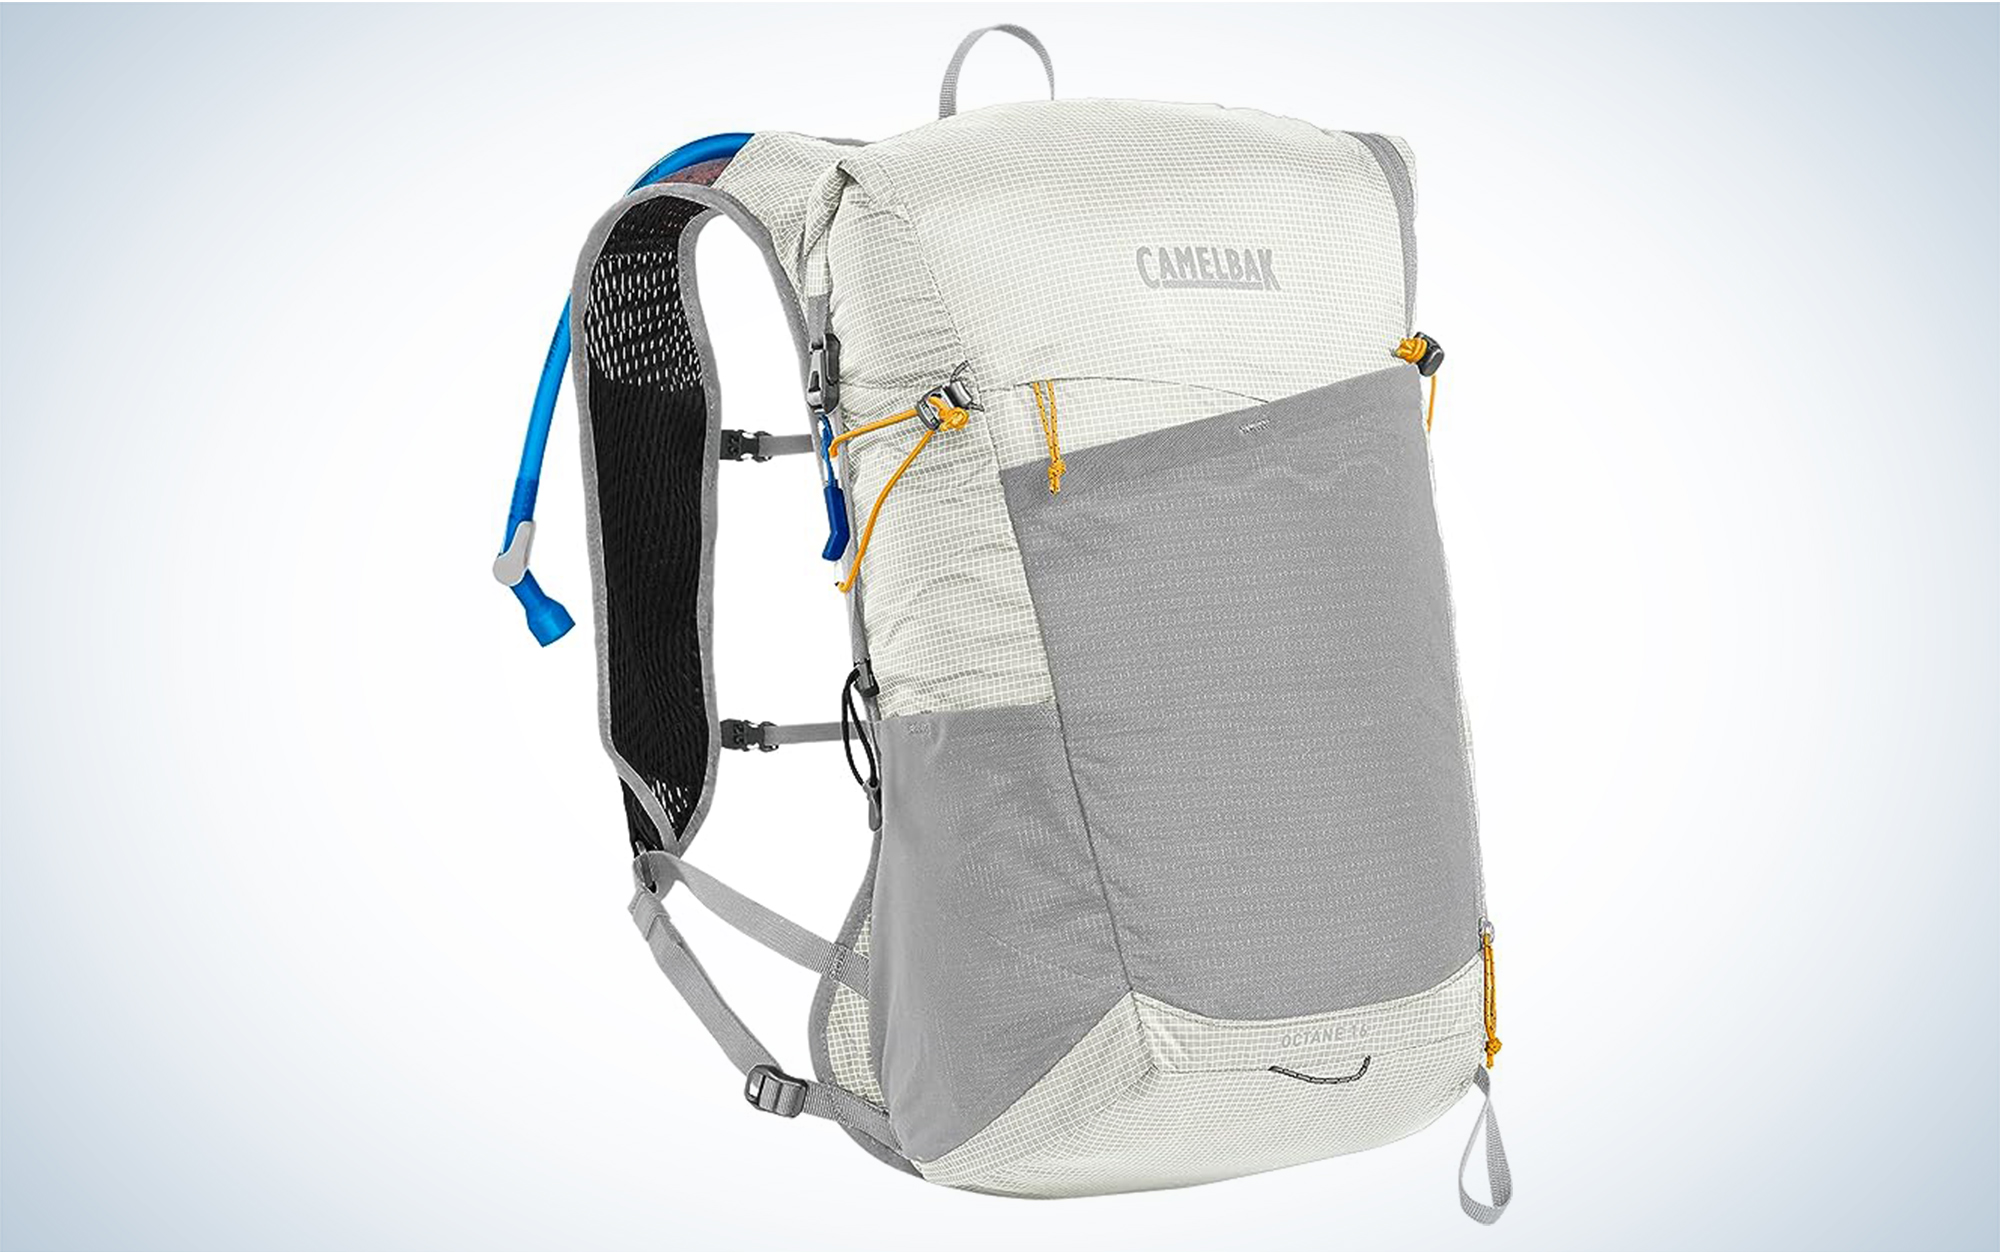 We tested the CamelBak Octane 16 Hydration Hiking Pack with Fusion 2L Reservoir.